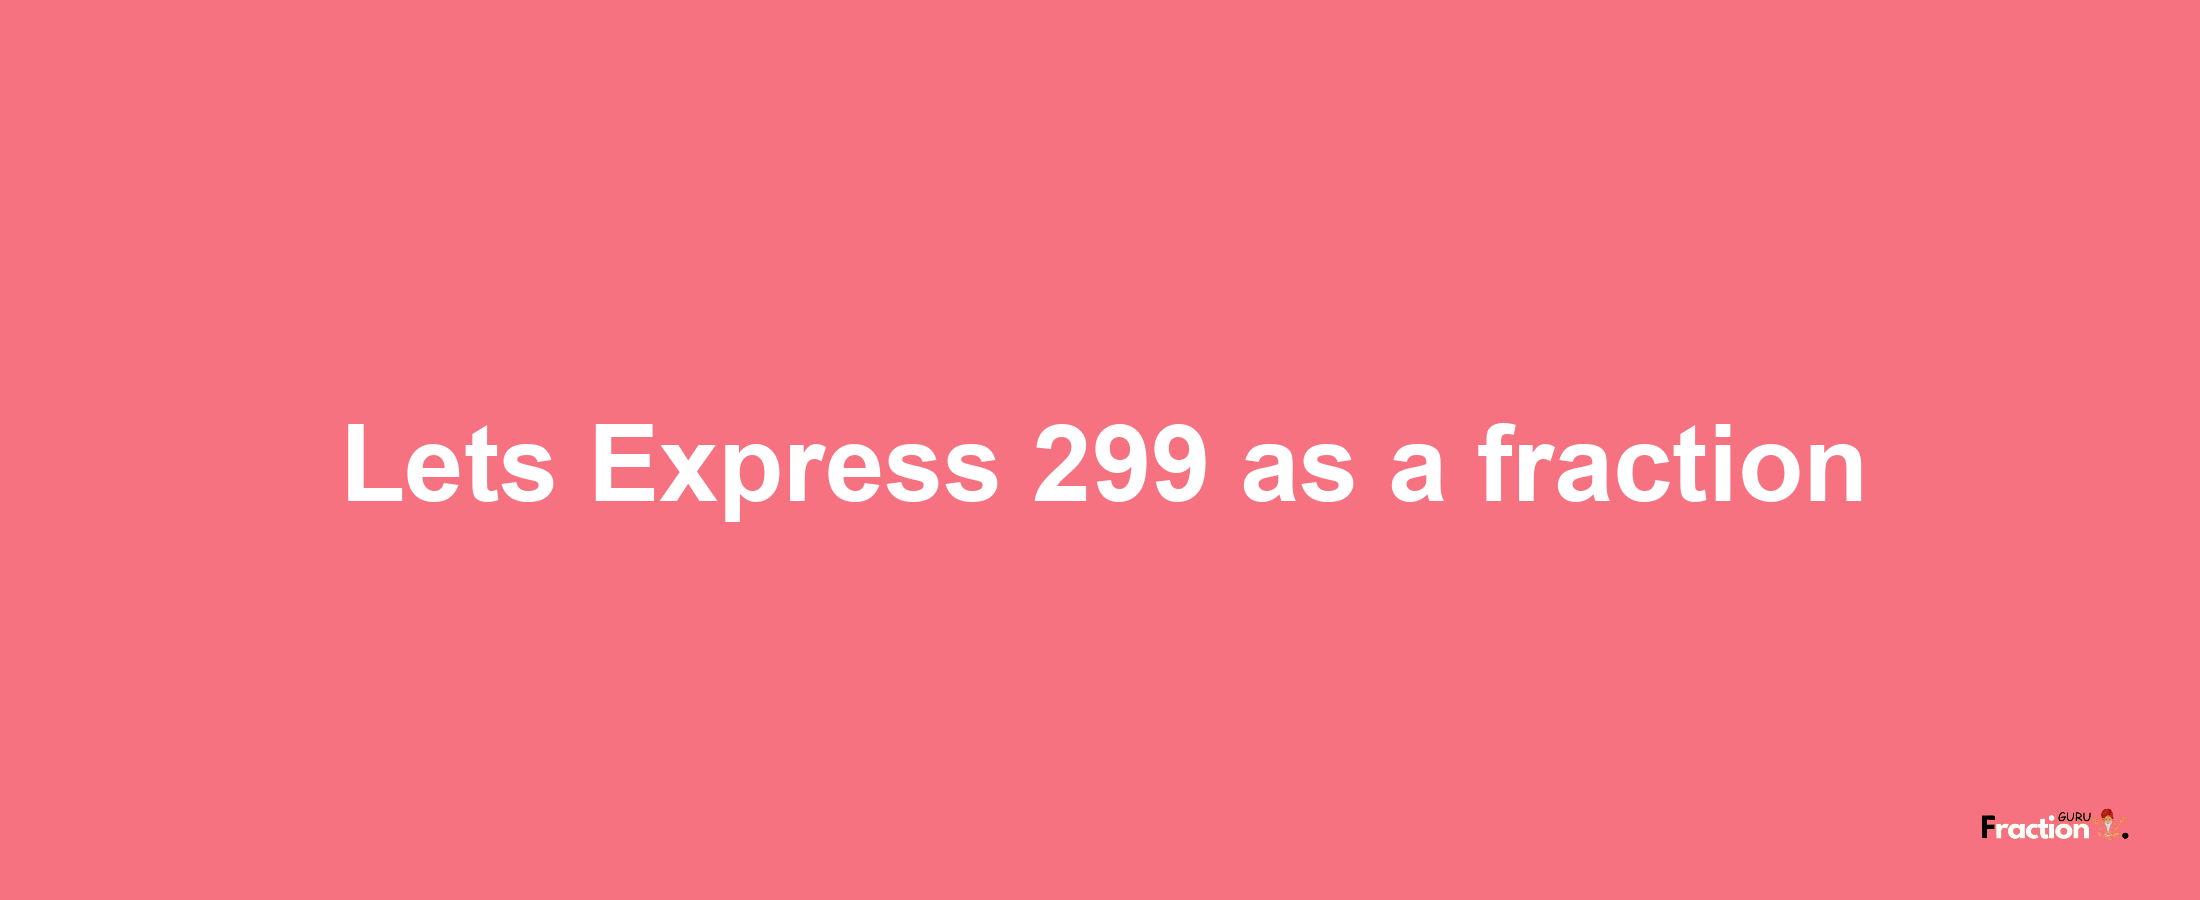 Lets Express 299 as afraction